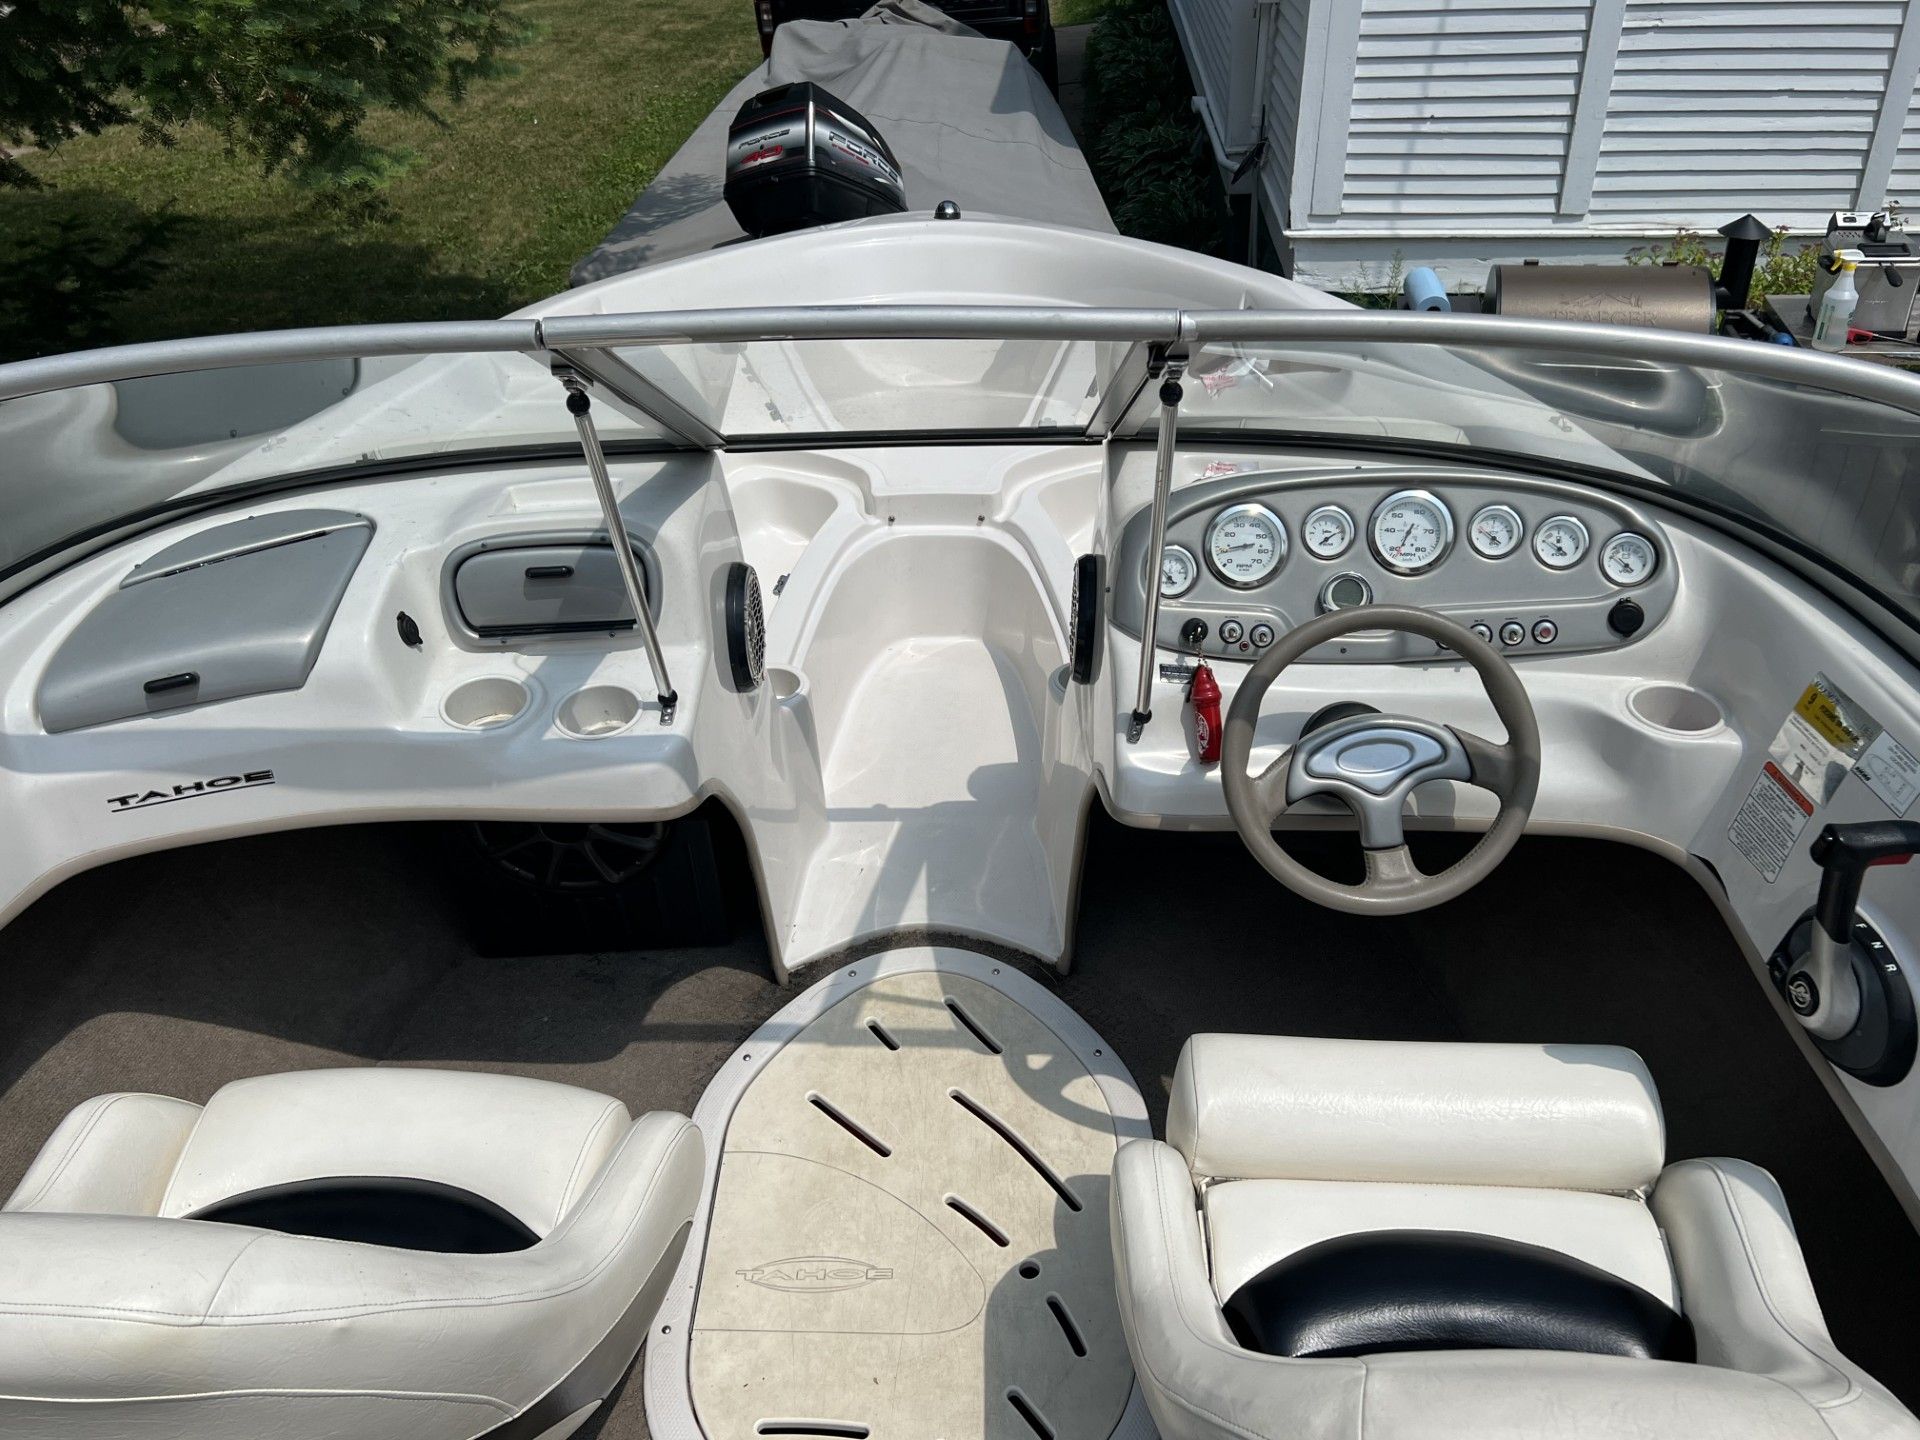 the inside of a boat with a steering wheel and dashboard